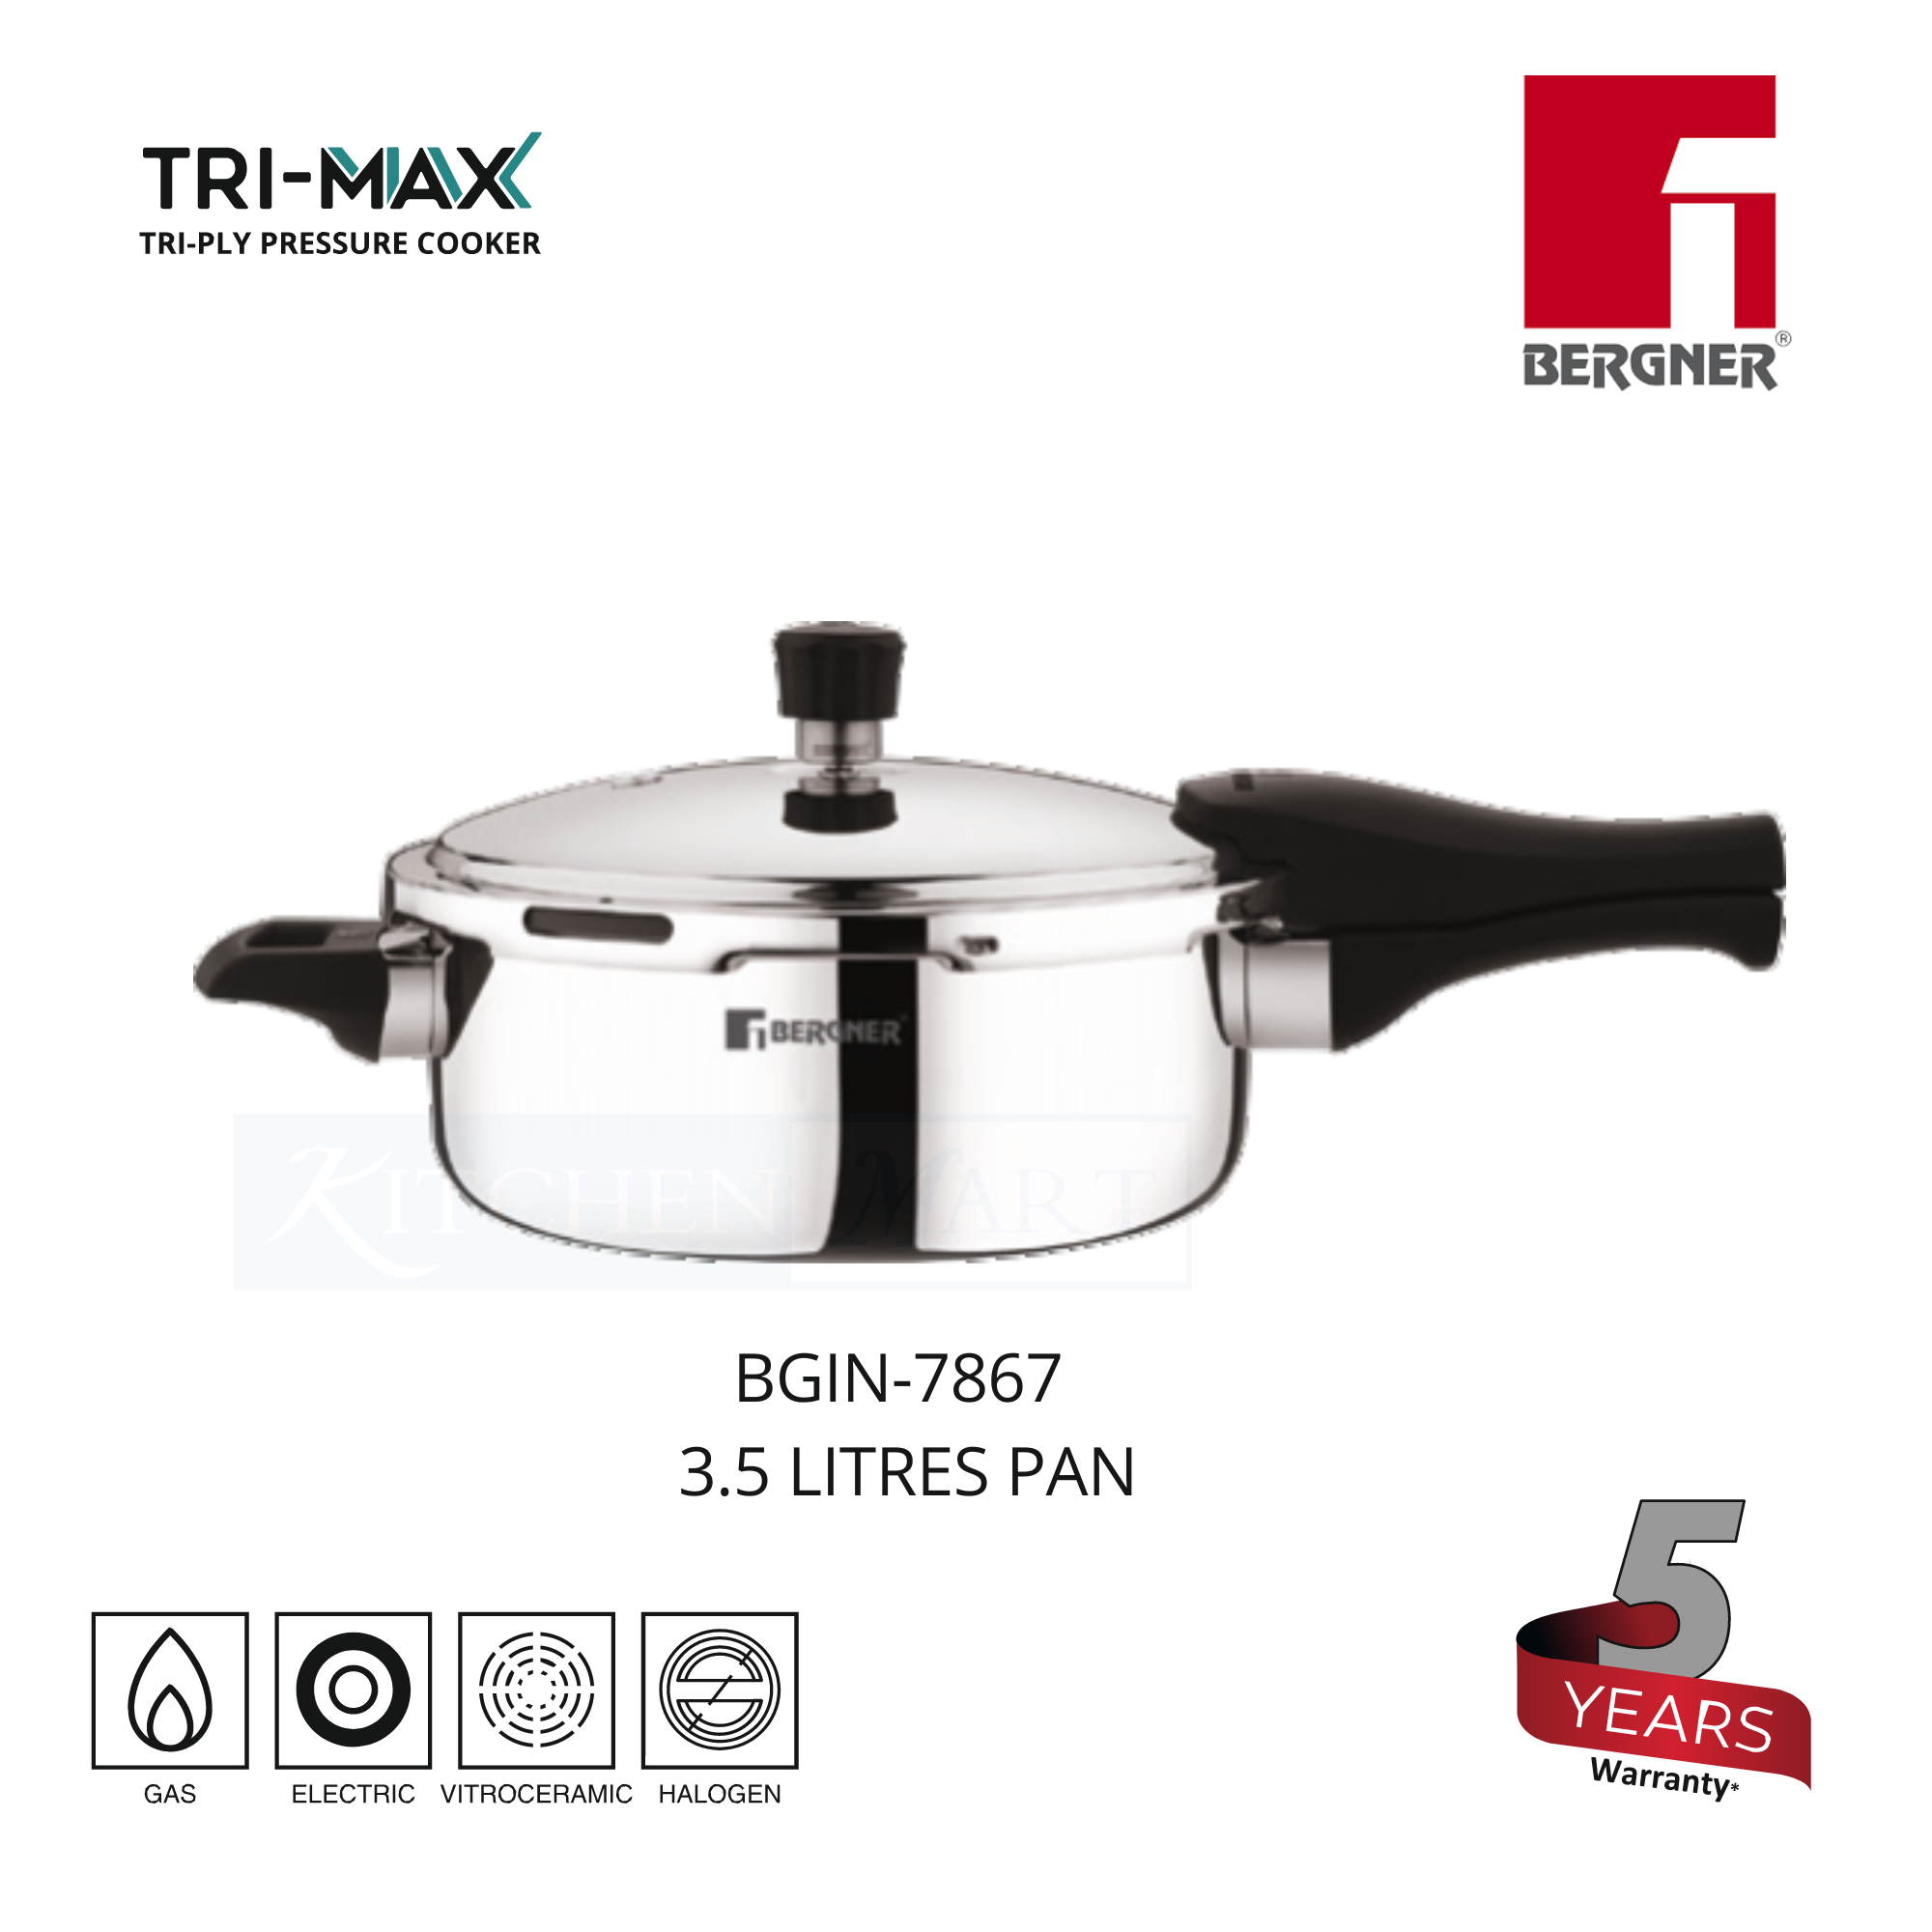 BERGNER Argent TriMax Tri-Ply Stainless Steel Cooker With Outer Lid